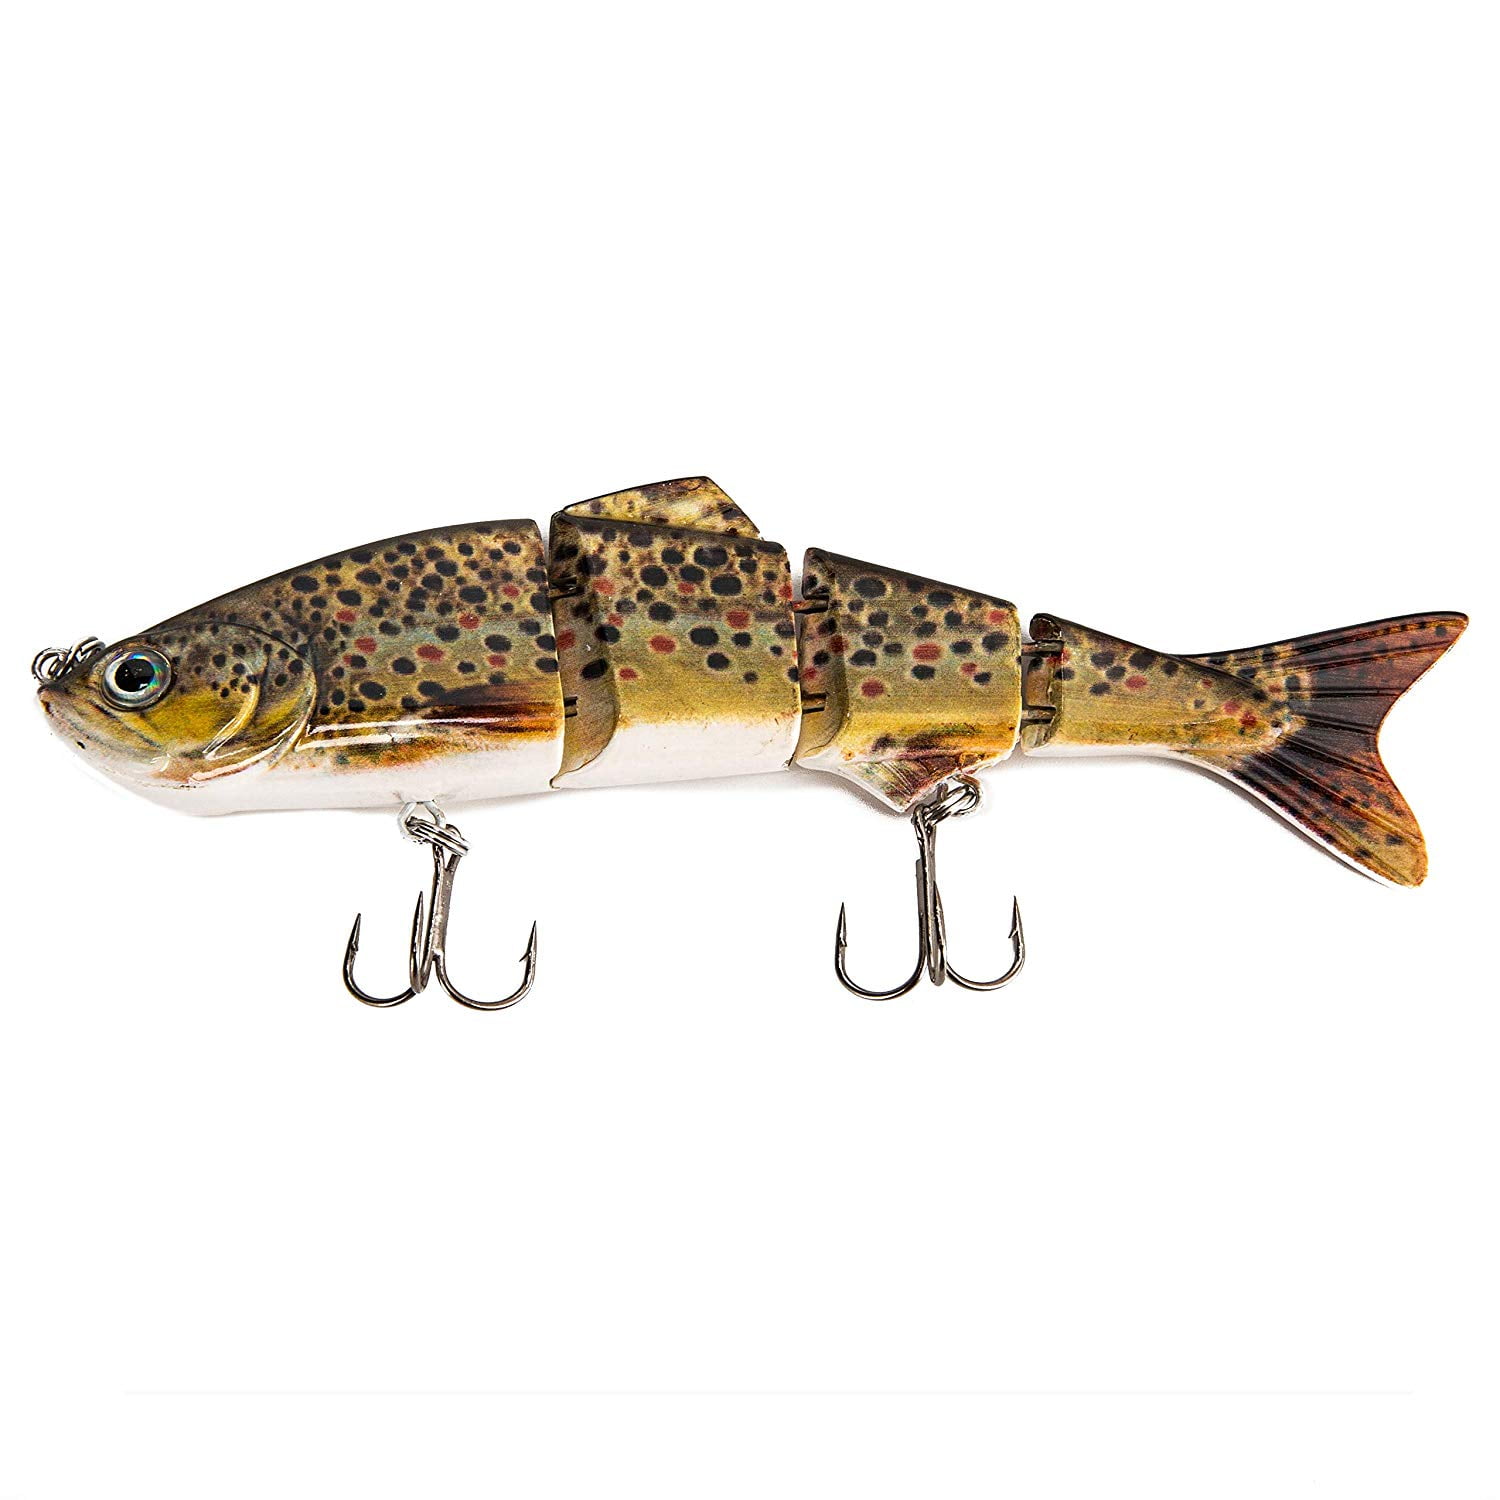 Jointed Bait 165mm 55g 135mm 33g Shad Glider Unpainted Swimbait Fishing  Lures Hard Body Floating Pike Fishing Bait Tackle